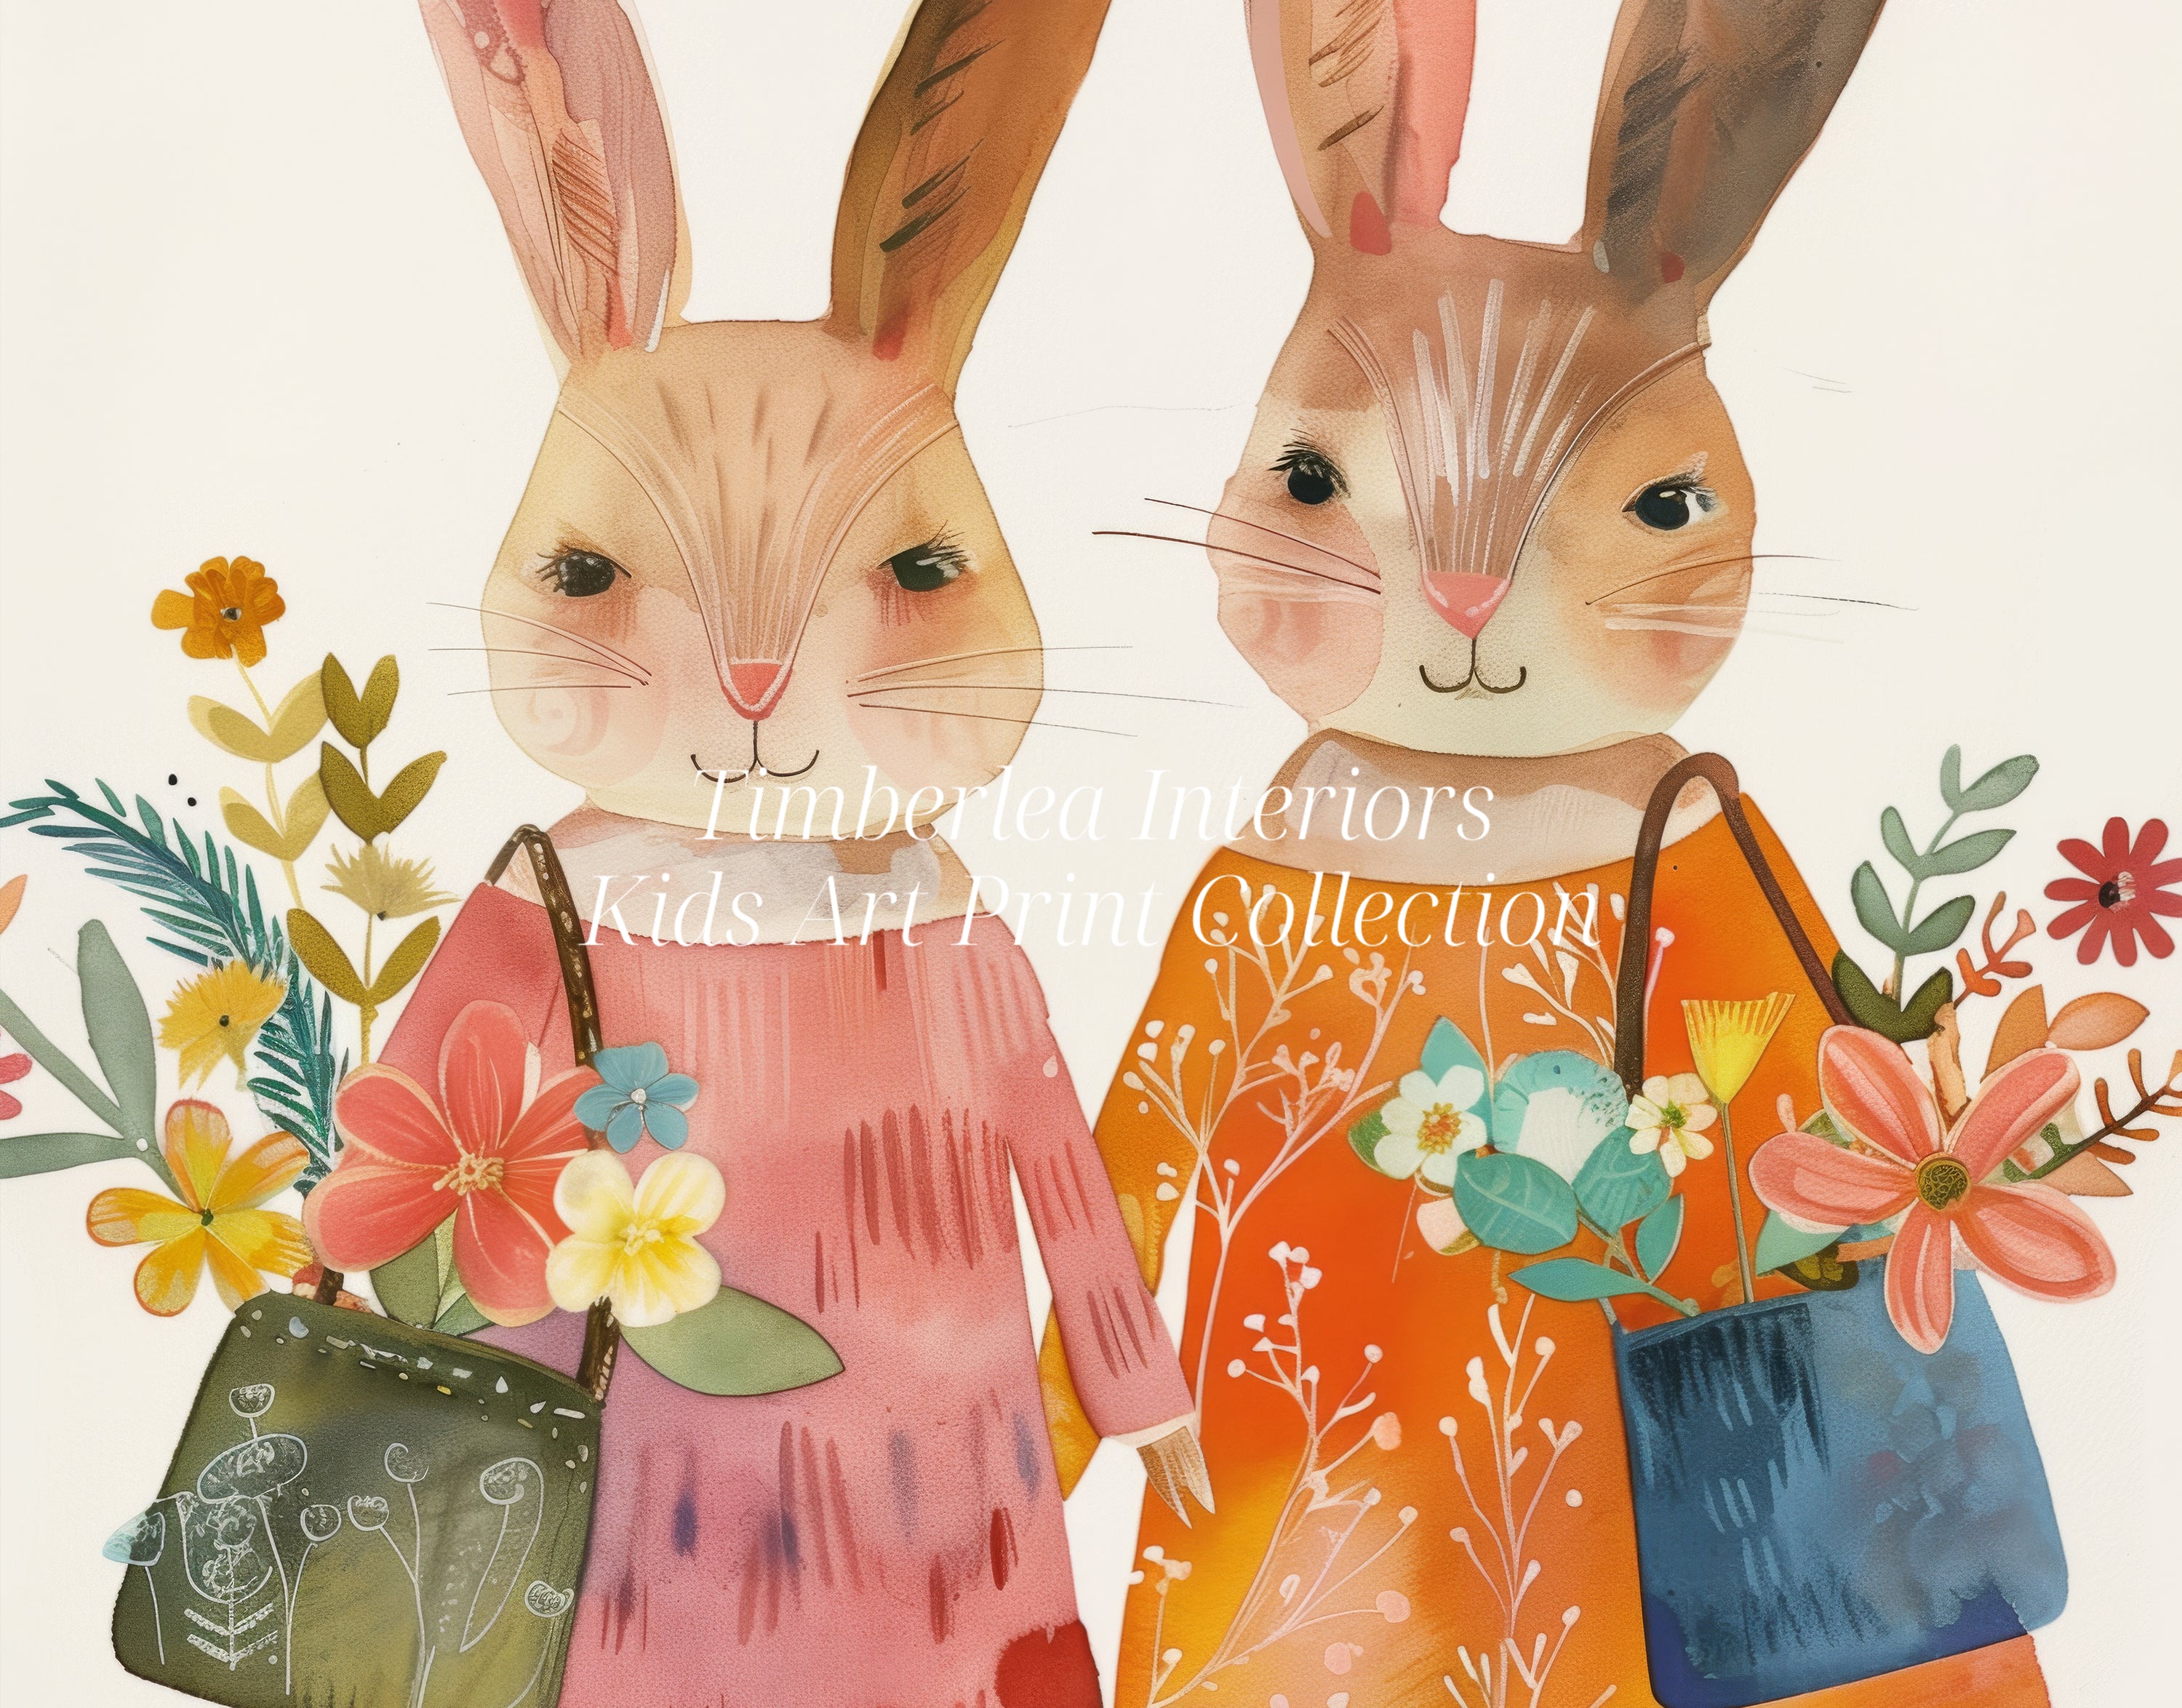 Close-up of Floral Bunny Friends Art Print from Timberlea Interiors Kids Art Print Collection, featuring two adorable bunnies in colorful outfits holding flower-filled bags.